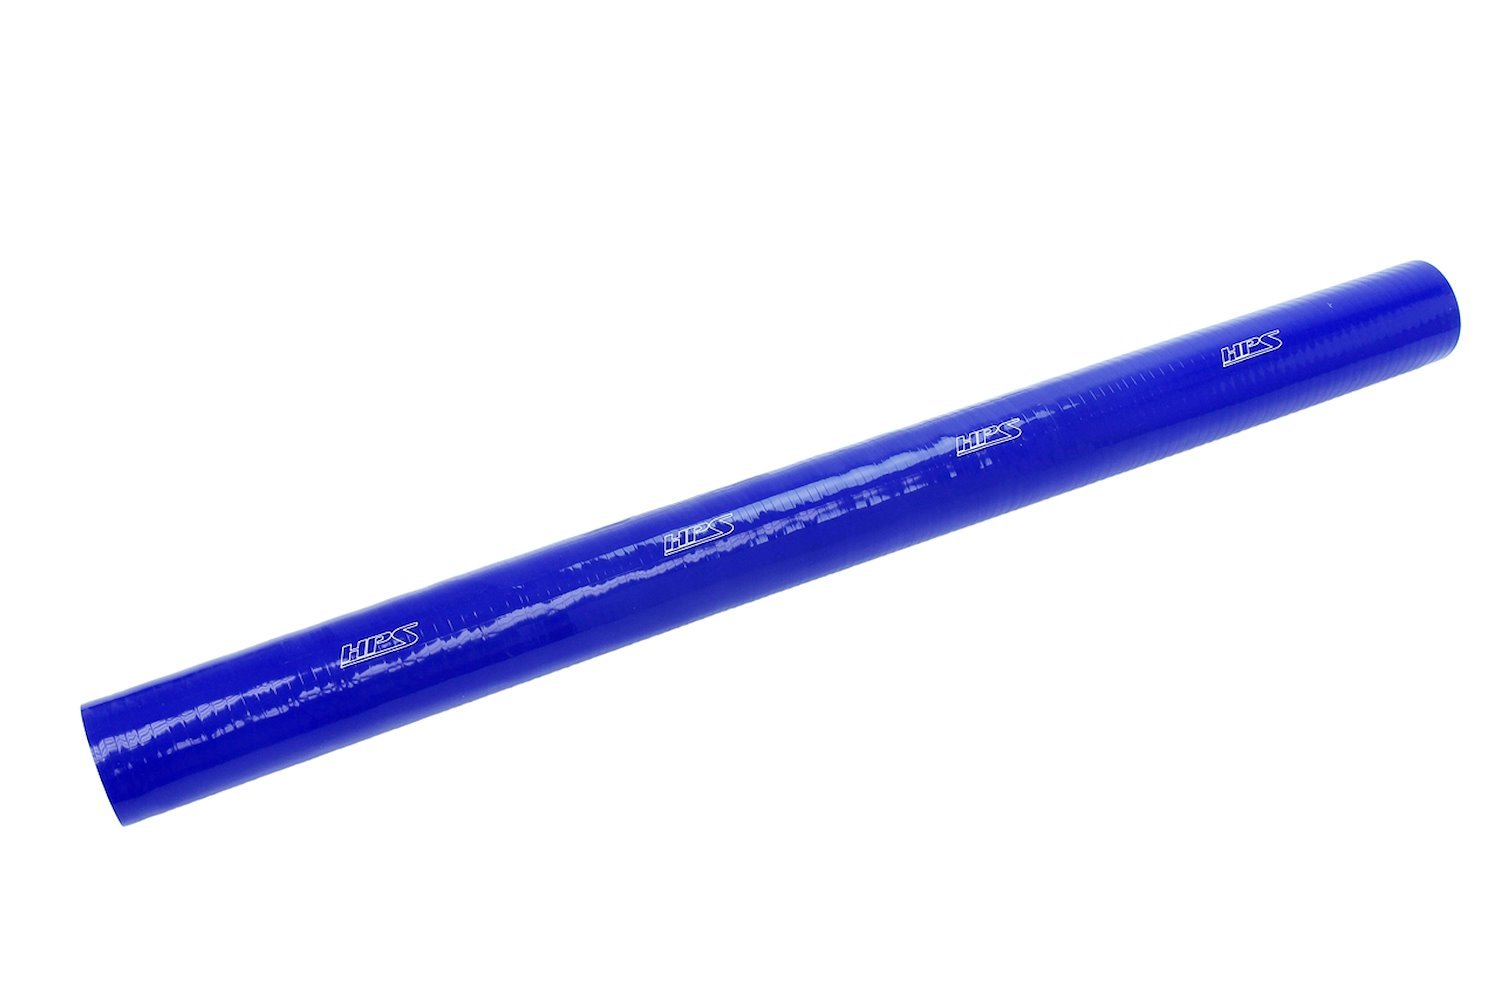 HTST-3F-1000-BLUE Silicone Coolant Tube, High-Temp 6-Ply Reinforced, 10 in. ID, 3 ft. Long, Blue